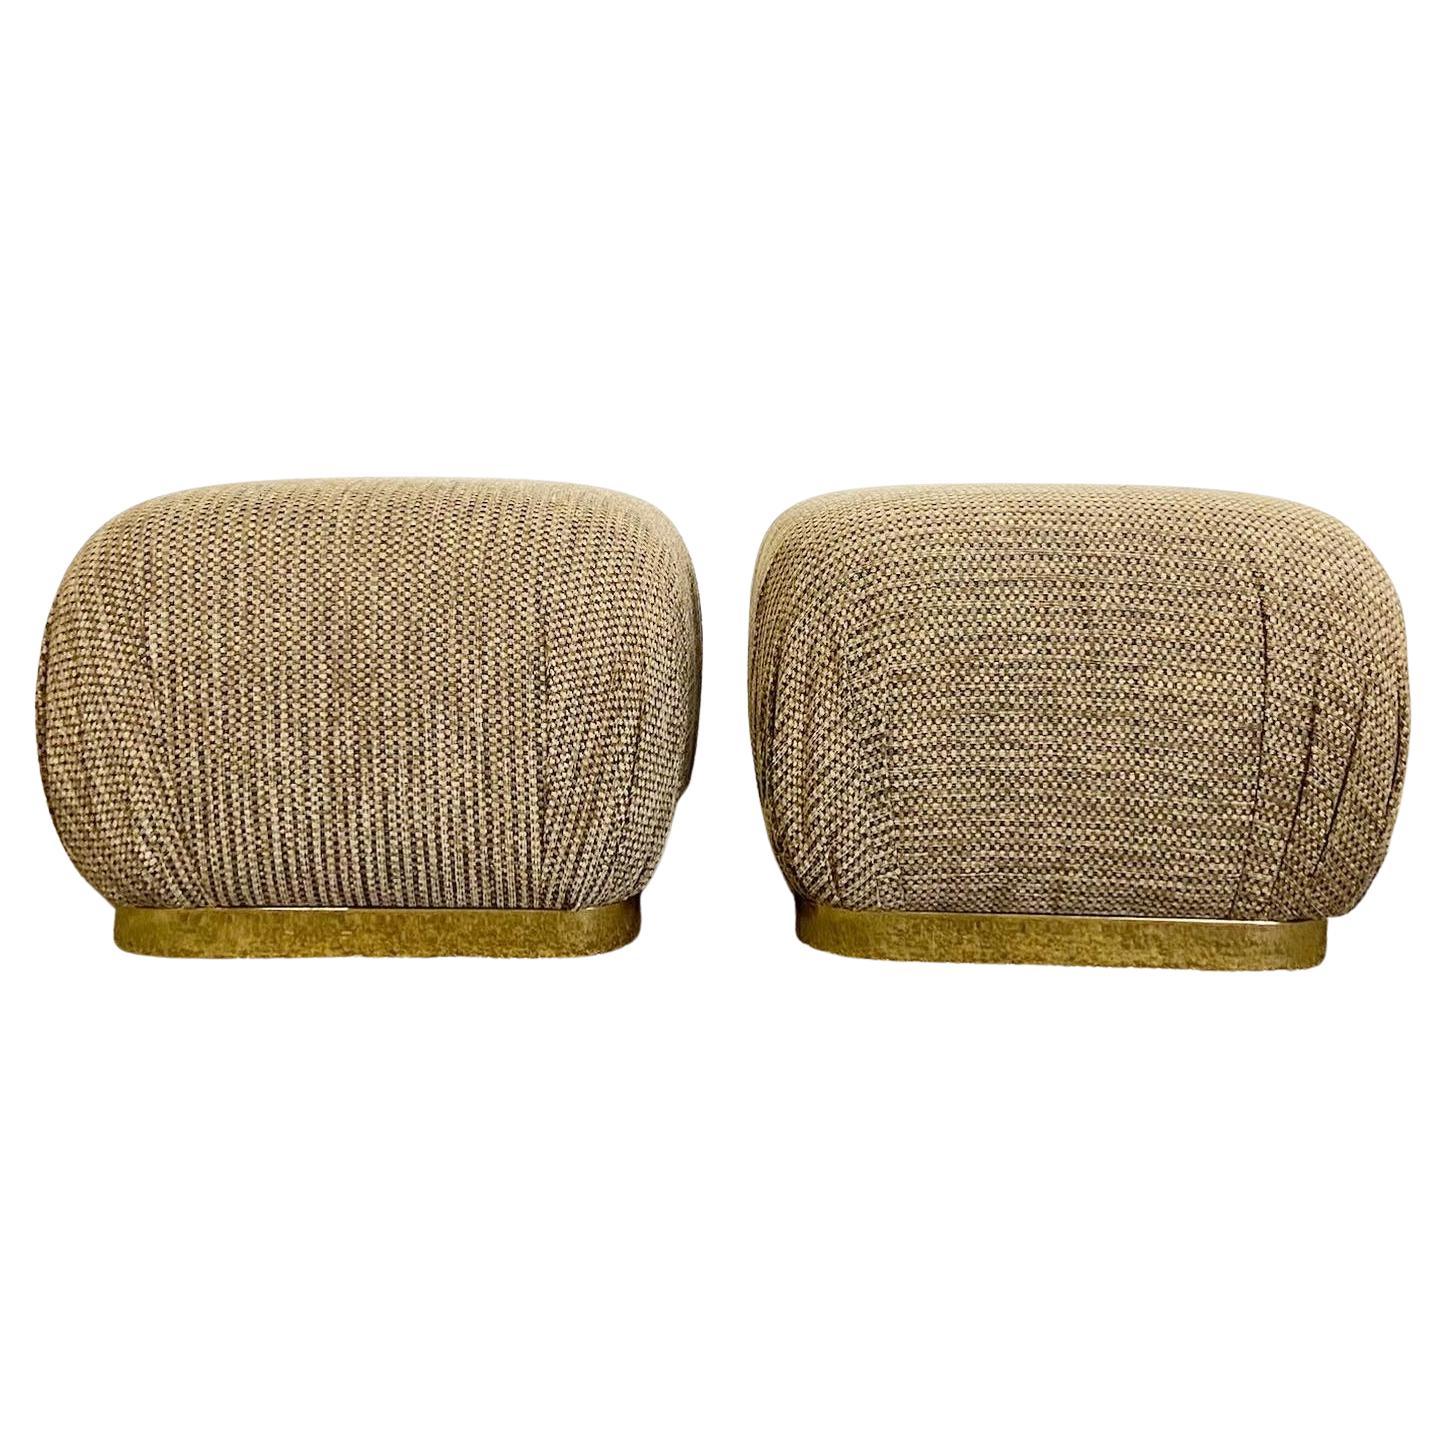 Postmodern Textured Brown Fabric Pouf Ottomans on Gold Base - a Pair For Sale